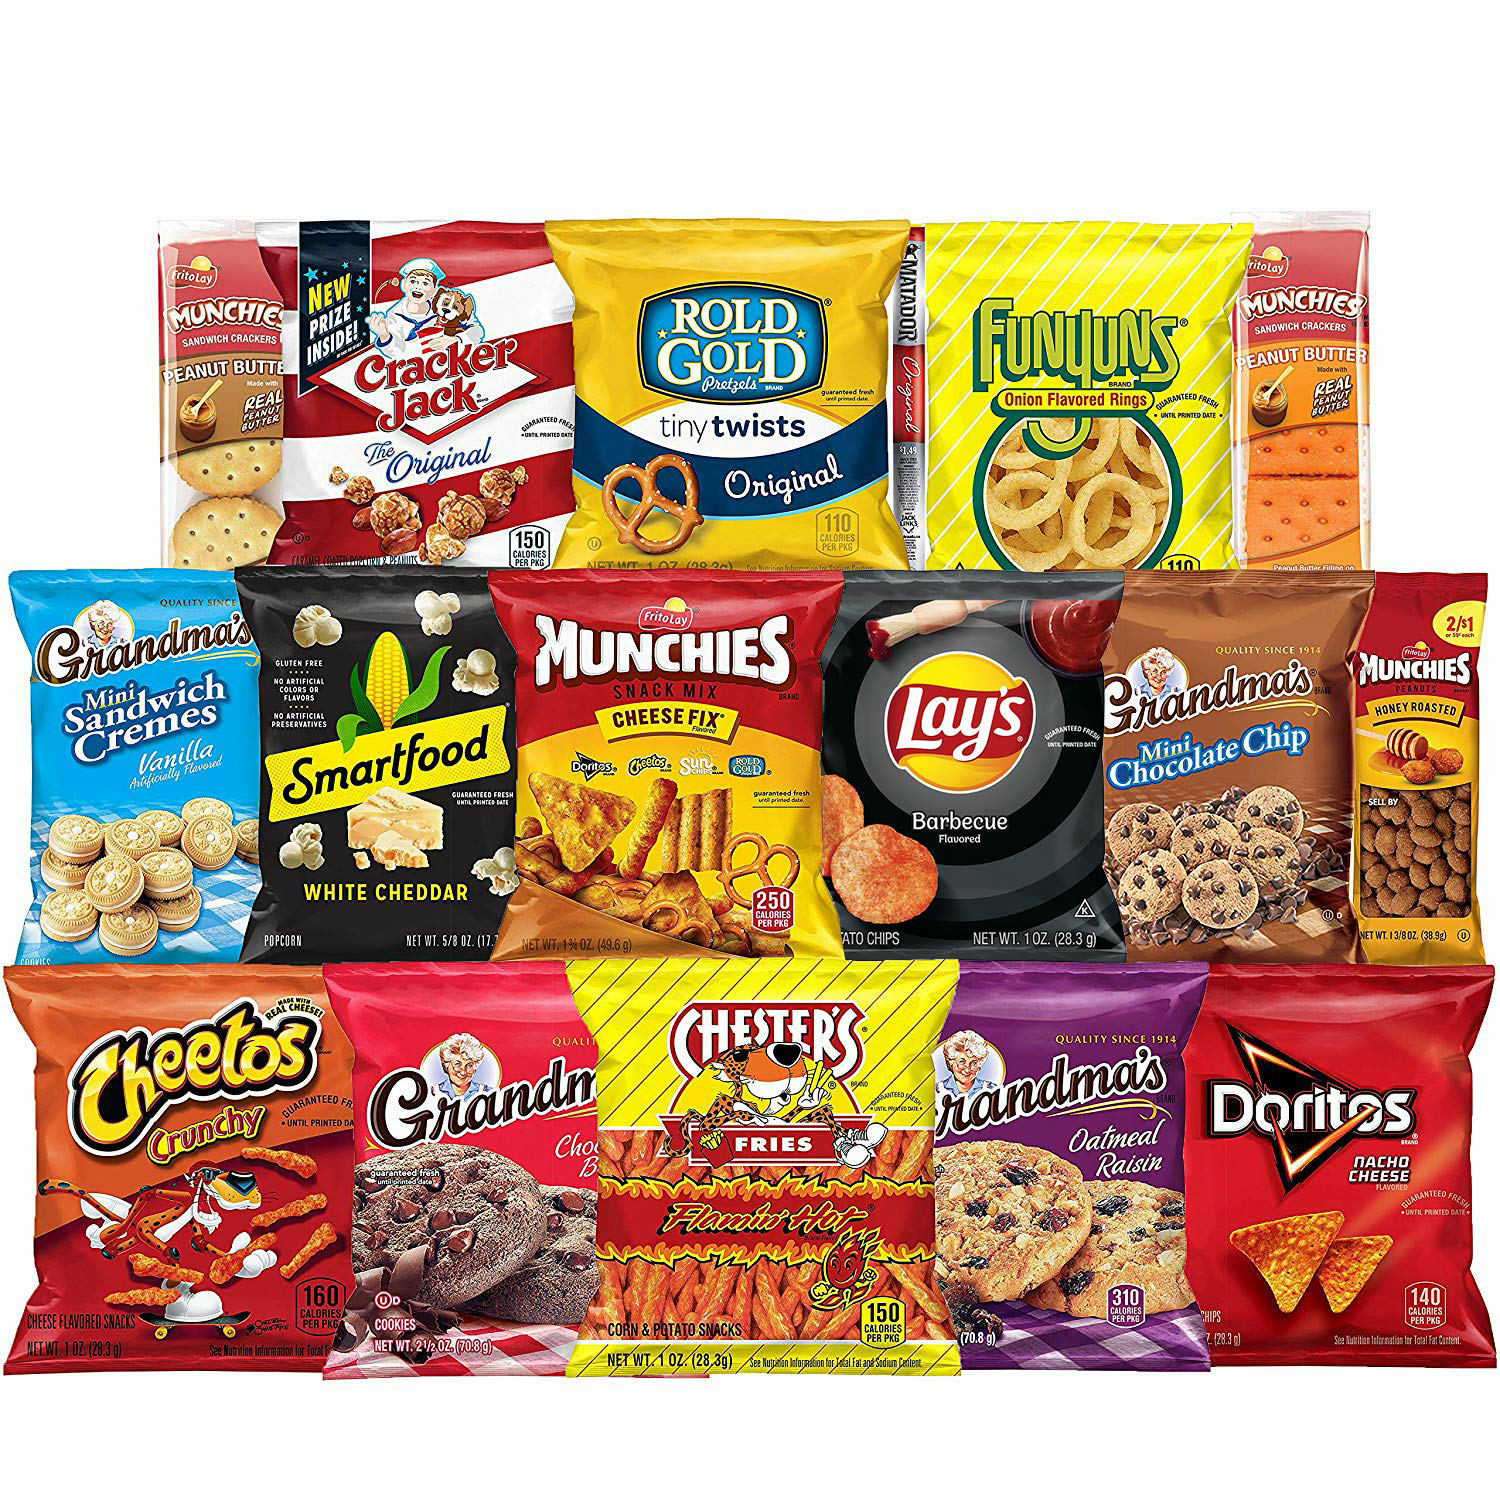 Amazon.com : Frito-Lay Ultimate Snack Care Package, Variety Assortment of Chips, Cookies, Crackers & More, 40 Count : Grocery & Gourmet Food $14.23